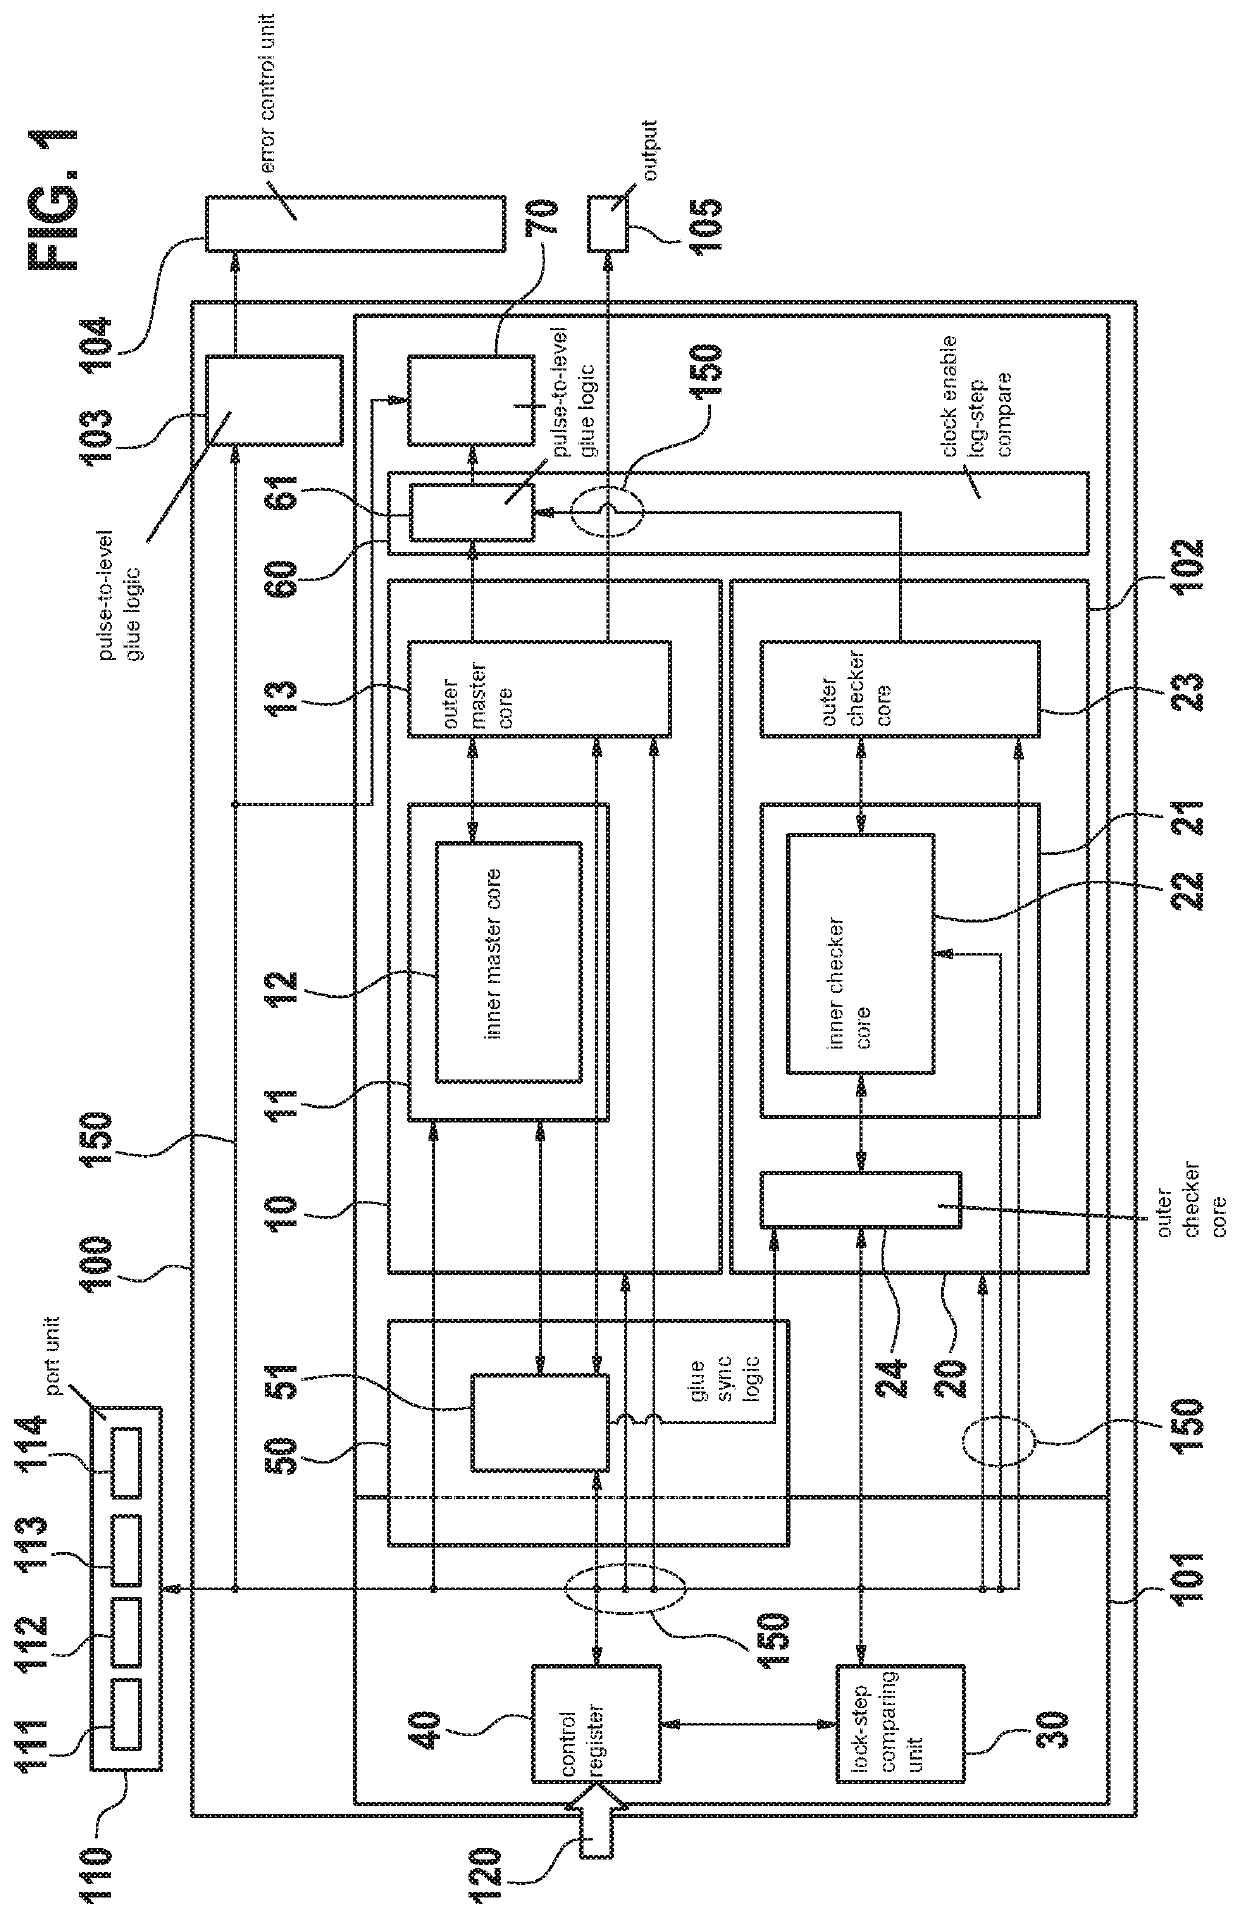 Clock fractional divider module, image and/or video processing module, and apparatus